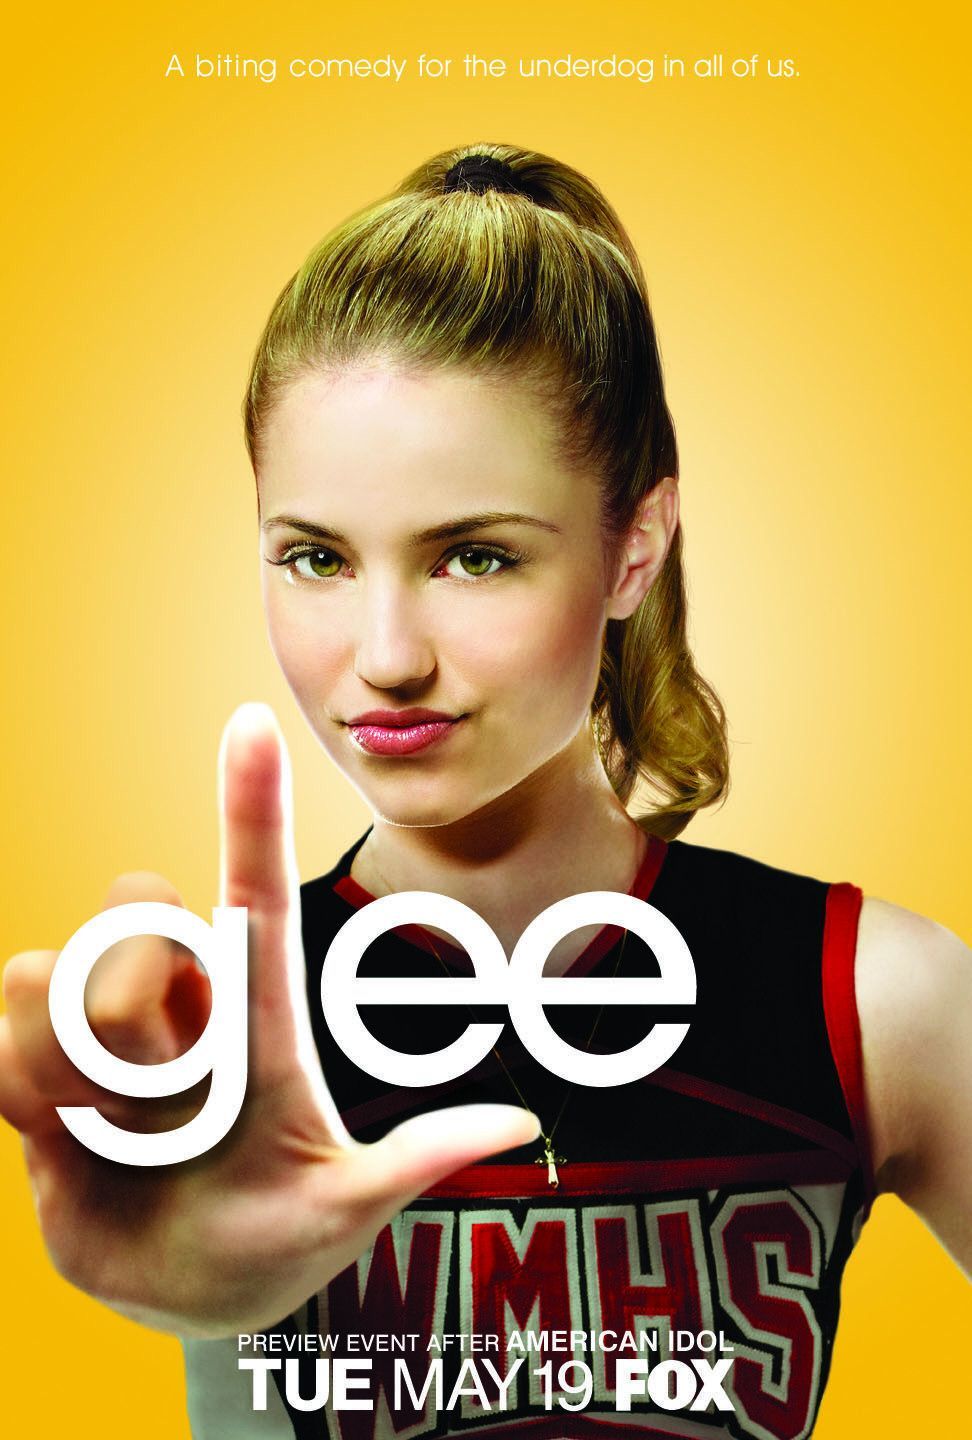 Glee live concert tour announcedIn an unprecedented live event, Twentieth Century Fox Television and {0} co-creator Ryan Murphy are bringing the hit television show to concert stages this spring.